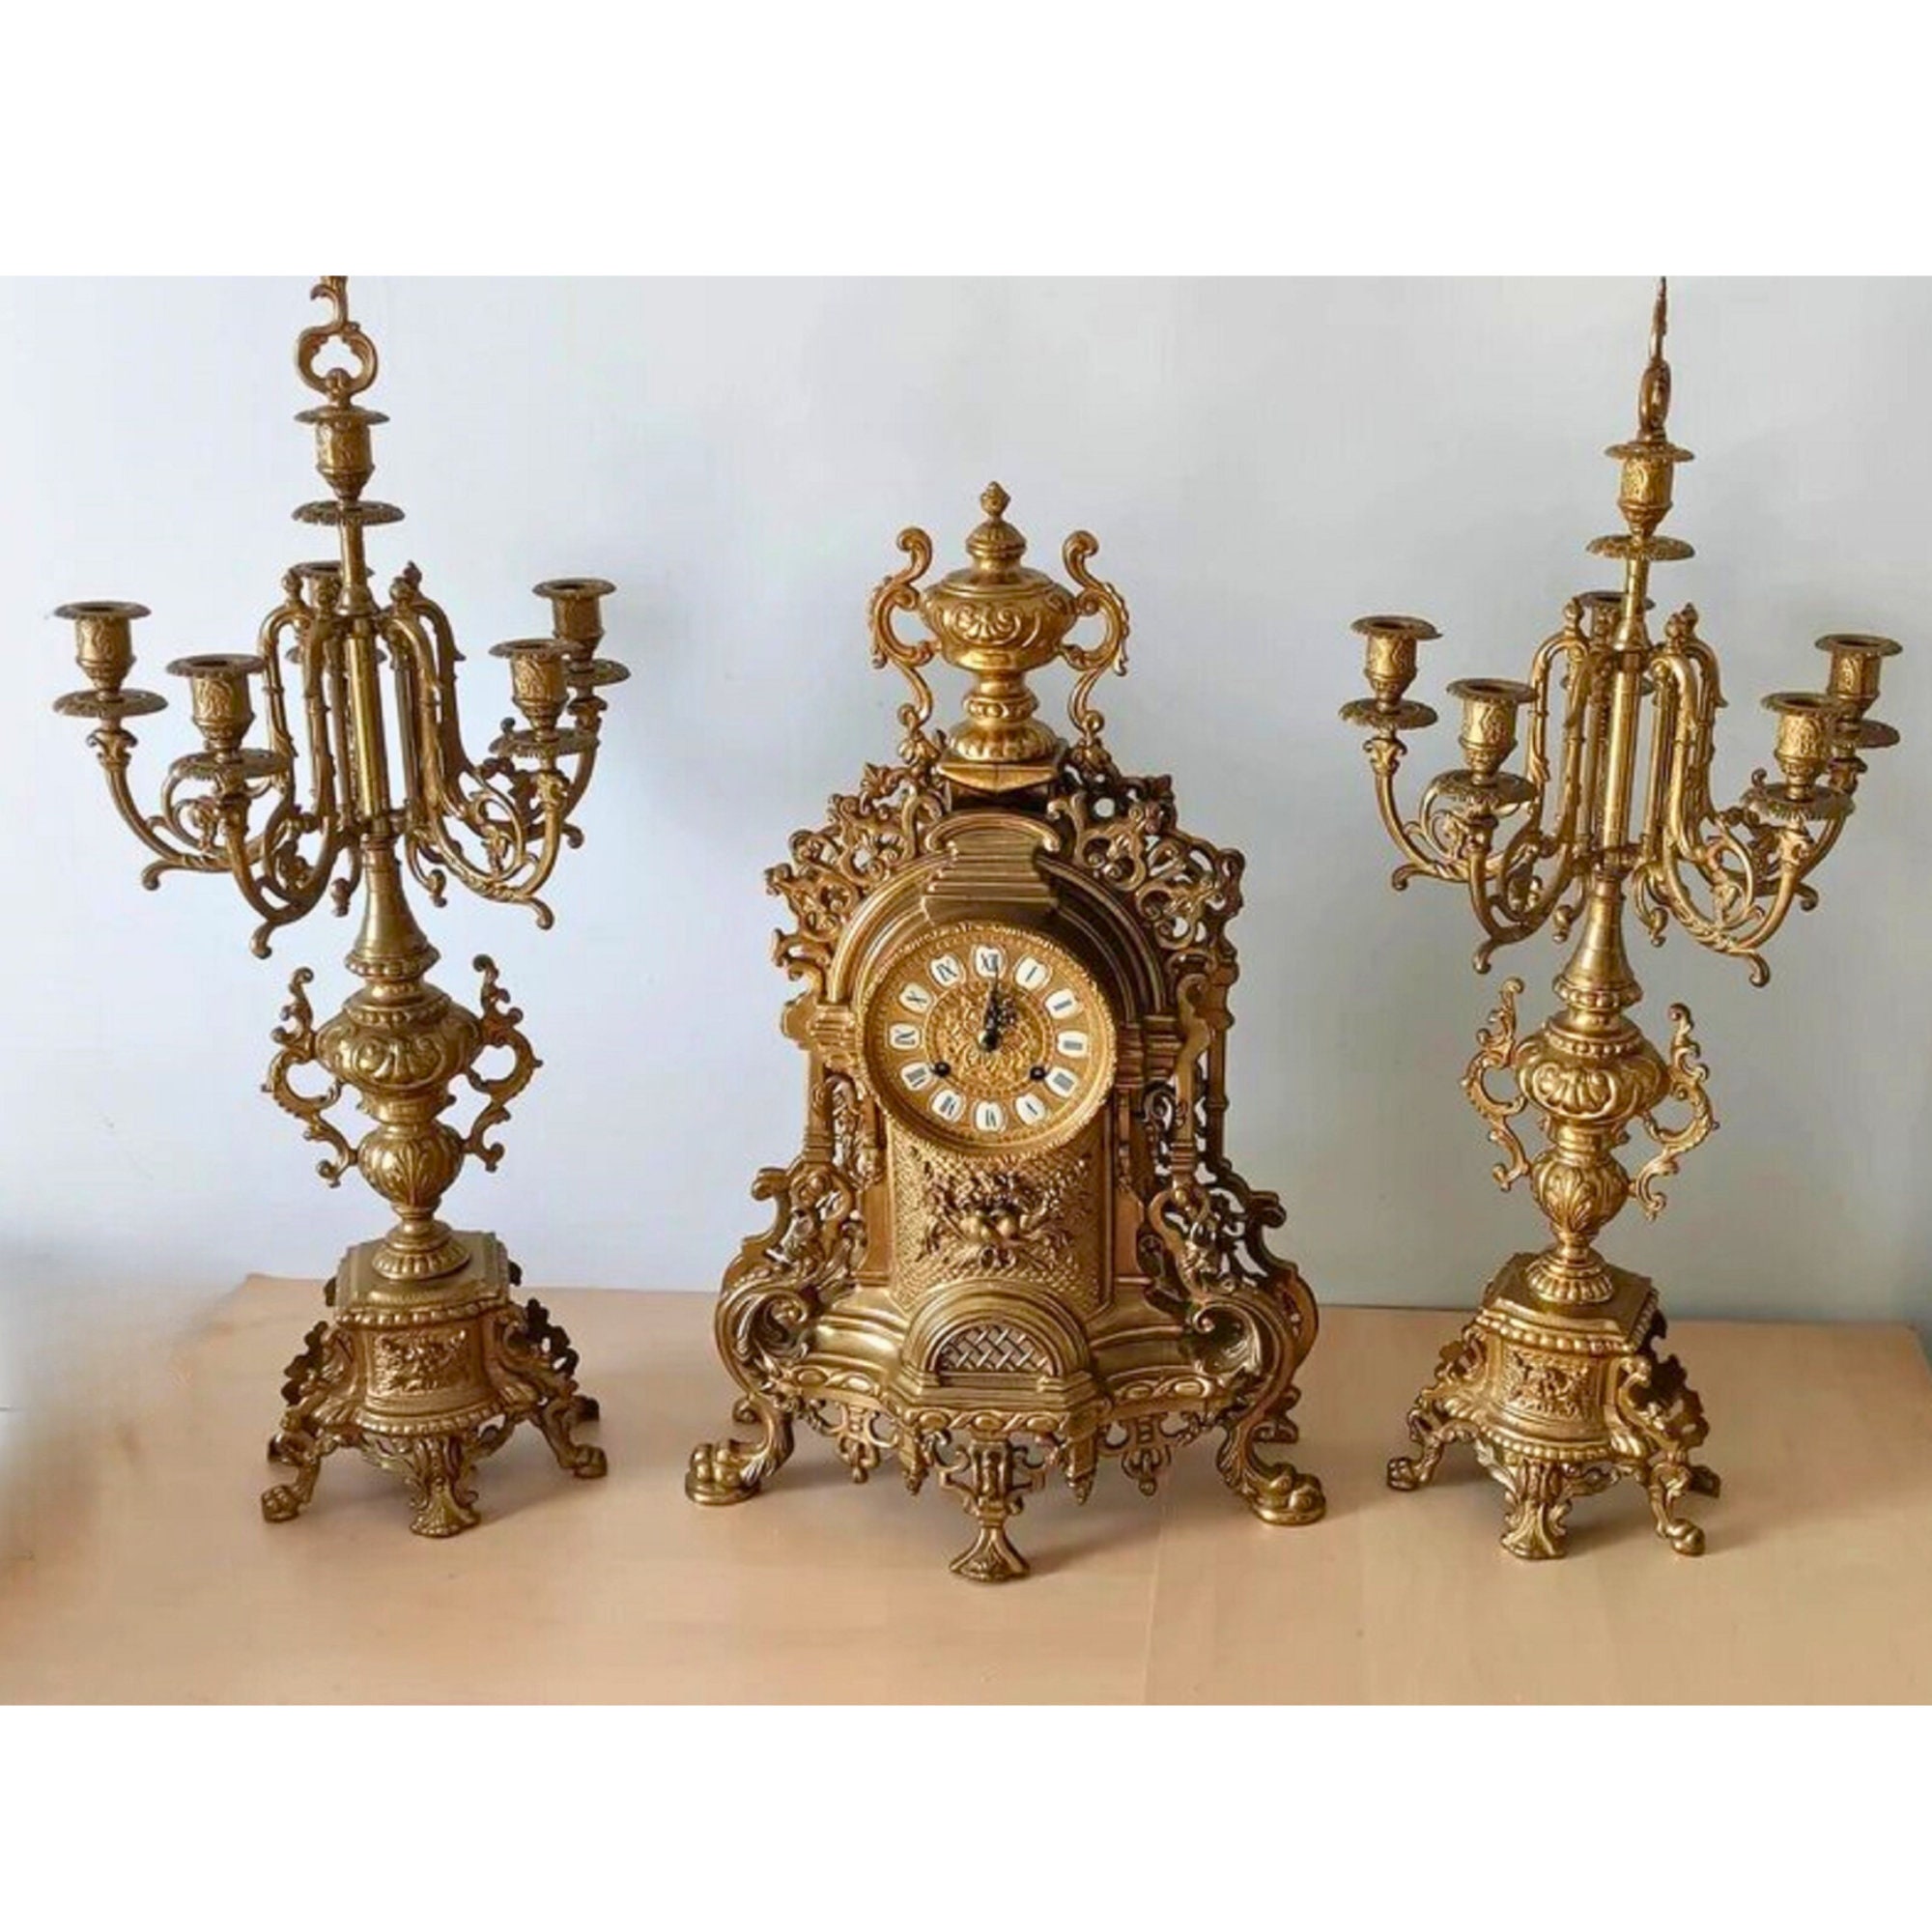 Large Amazing Brass Clock Exquisite Baroque-style Brass Clock Elaborately  Decorated Brass Beauty Brass Table Clock Richly Decorated 